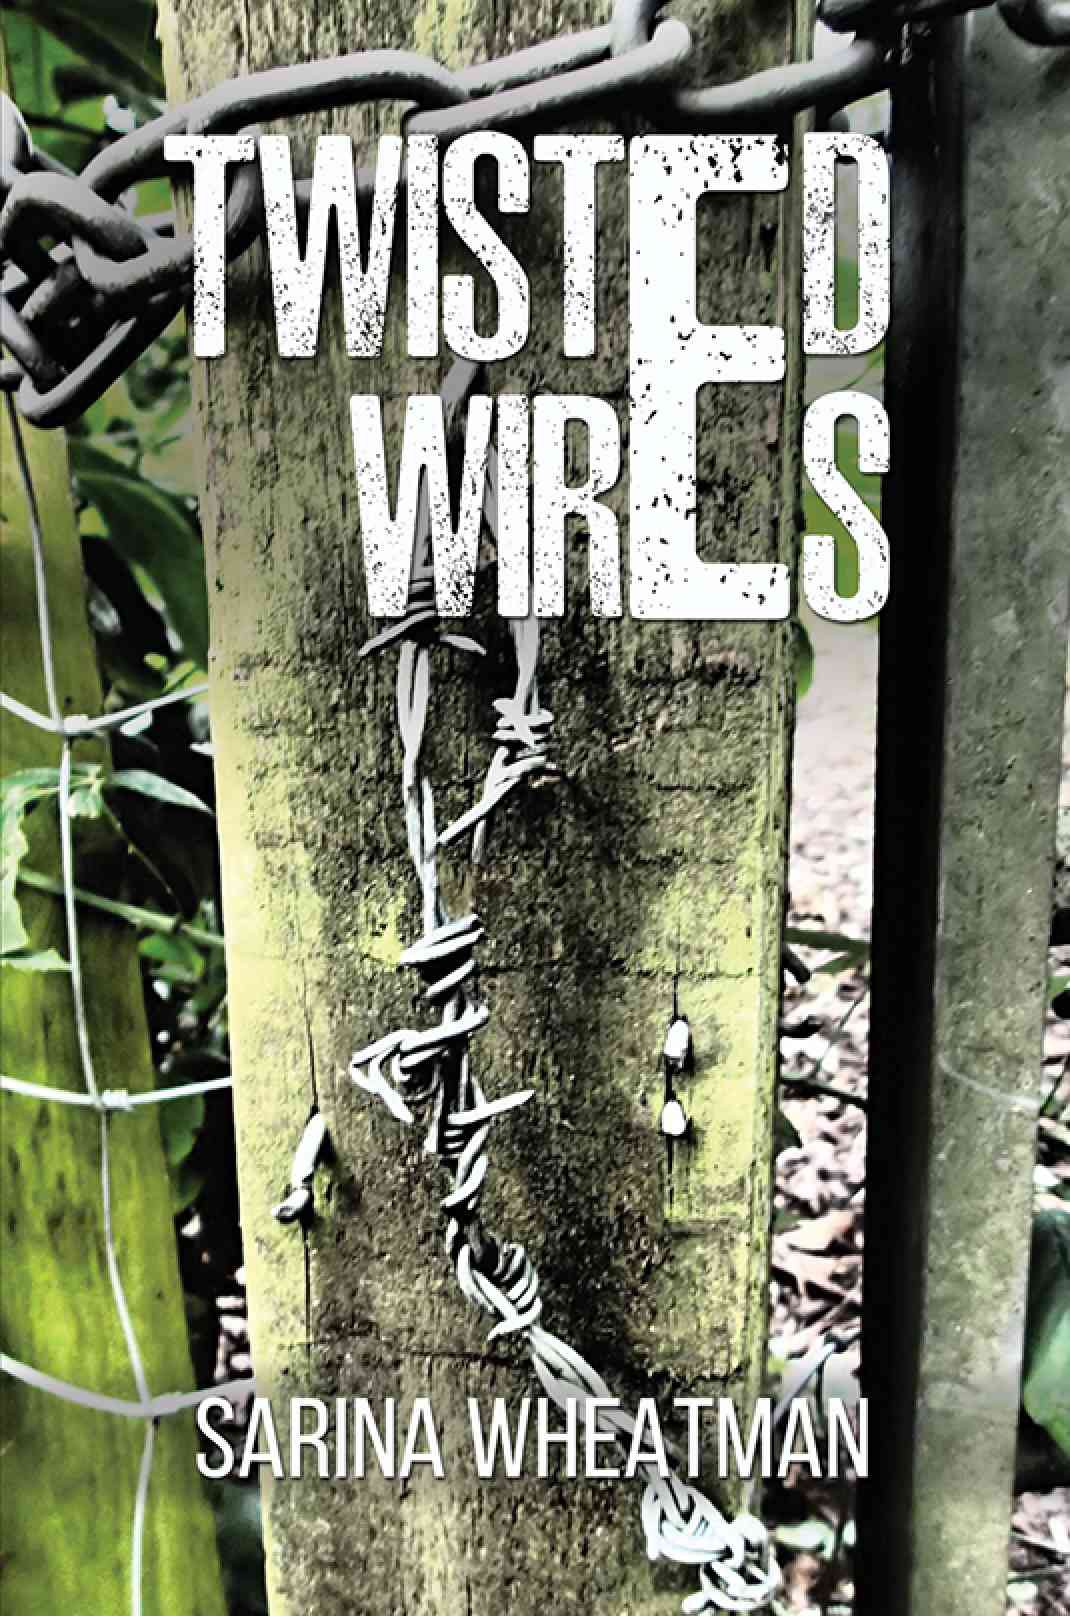 Sarina Wheatman, the author of ‘Twisted Wires’ Nominated for The Author Academy Awards